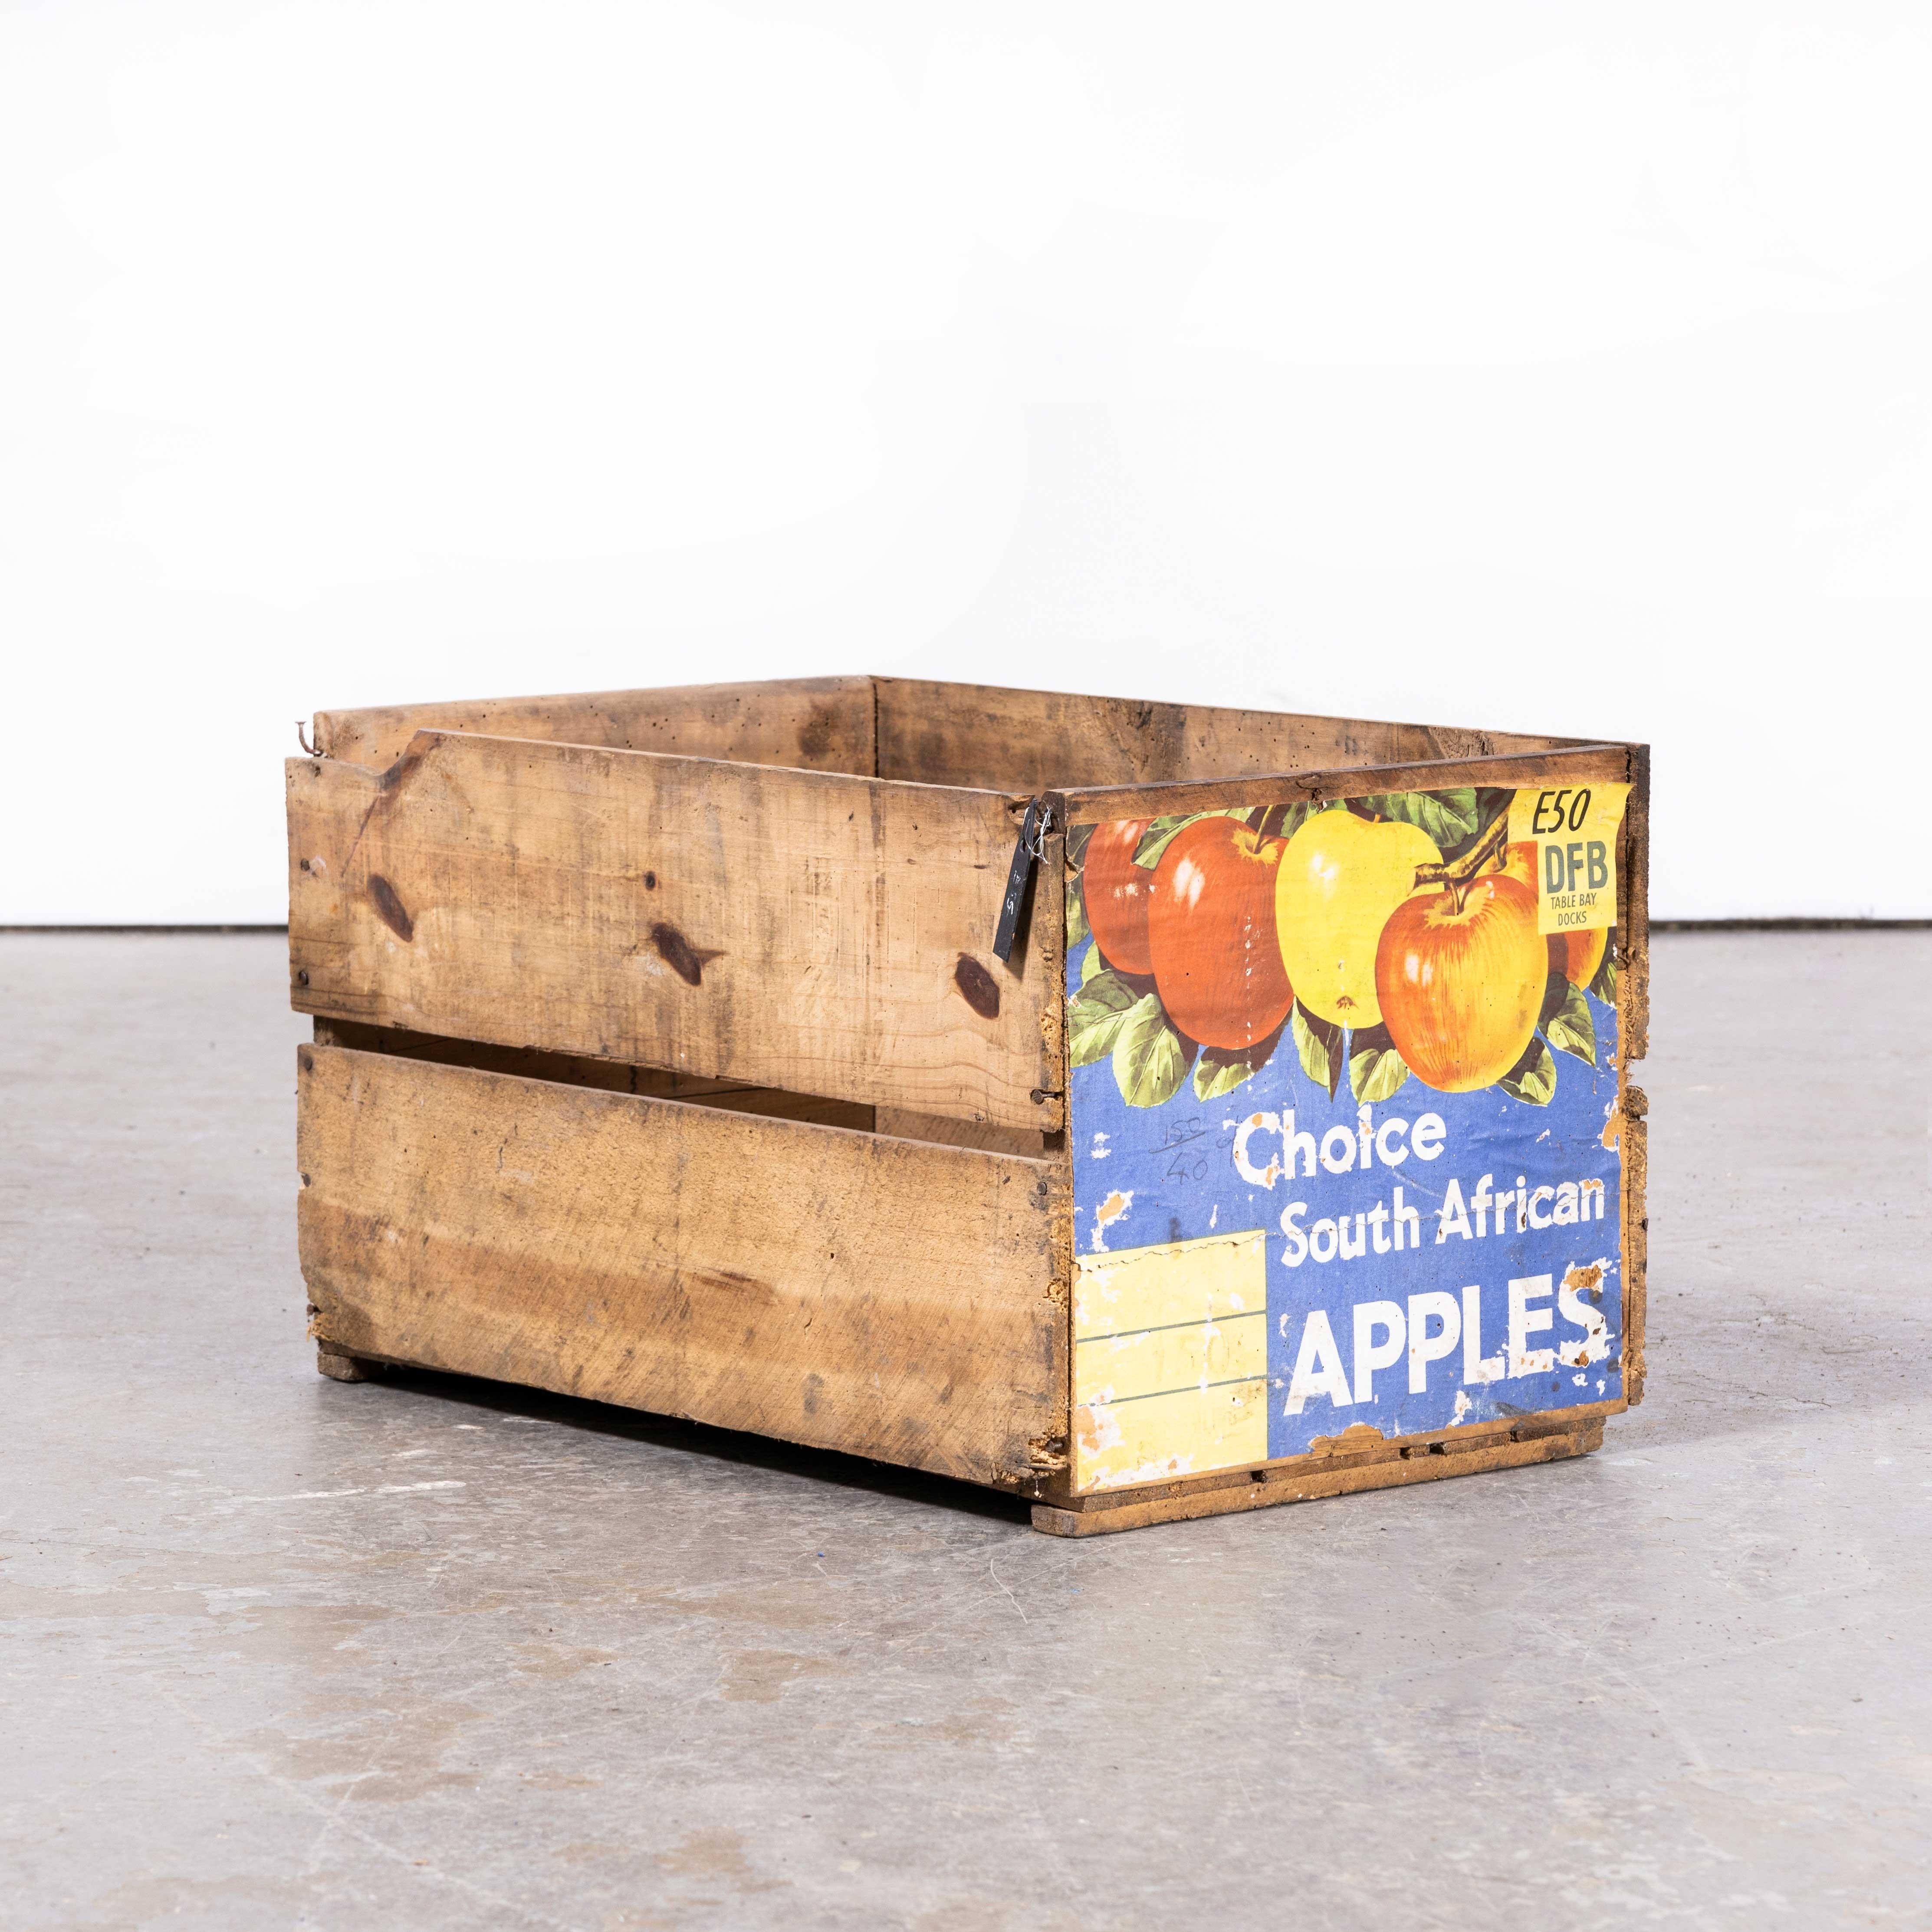 1950s South African Branded Produce Crate In Good Condition For Sale In Hook, Hampshire